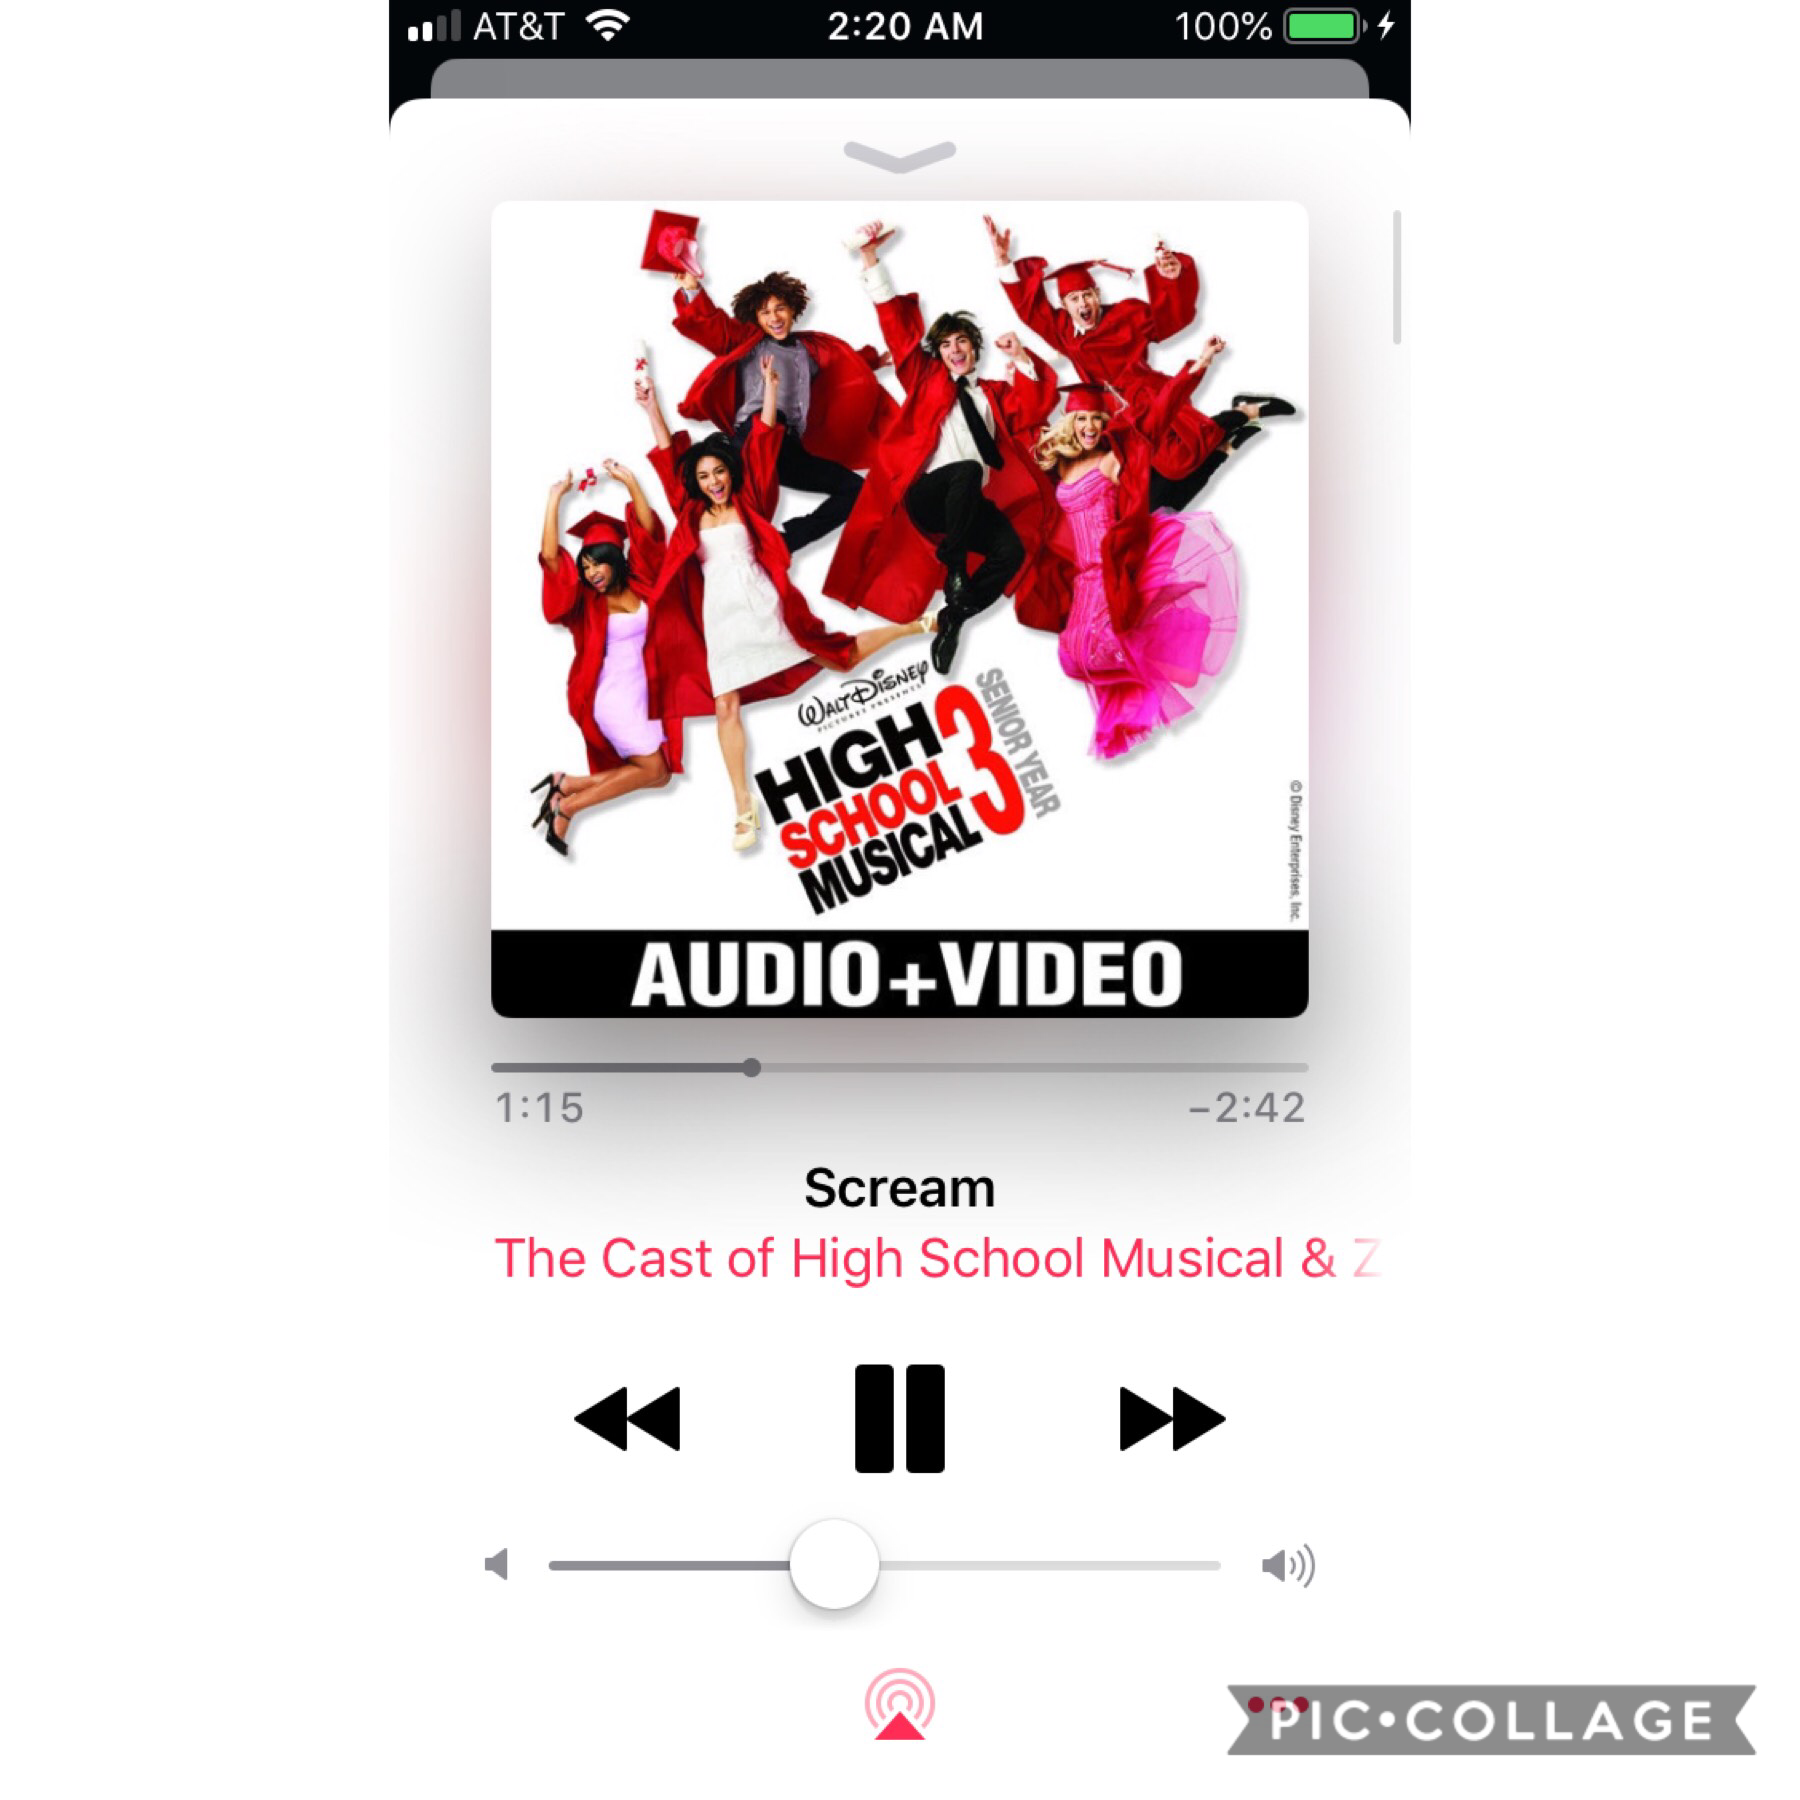 why does E V E R Y hsm song slap??? like from every movie??? literally listening to this at 2 in the morning w a loud volume is an outer body experience lol